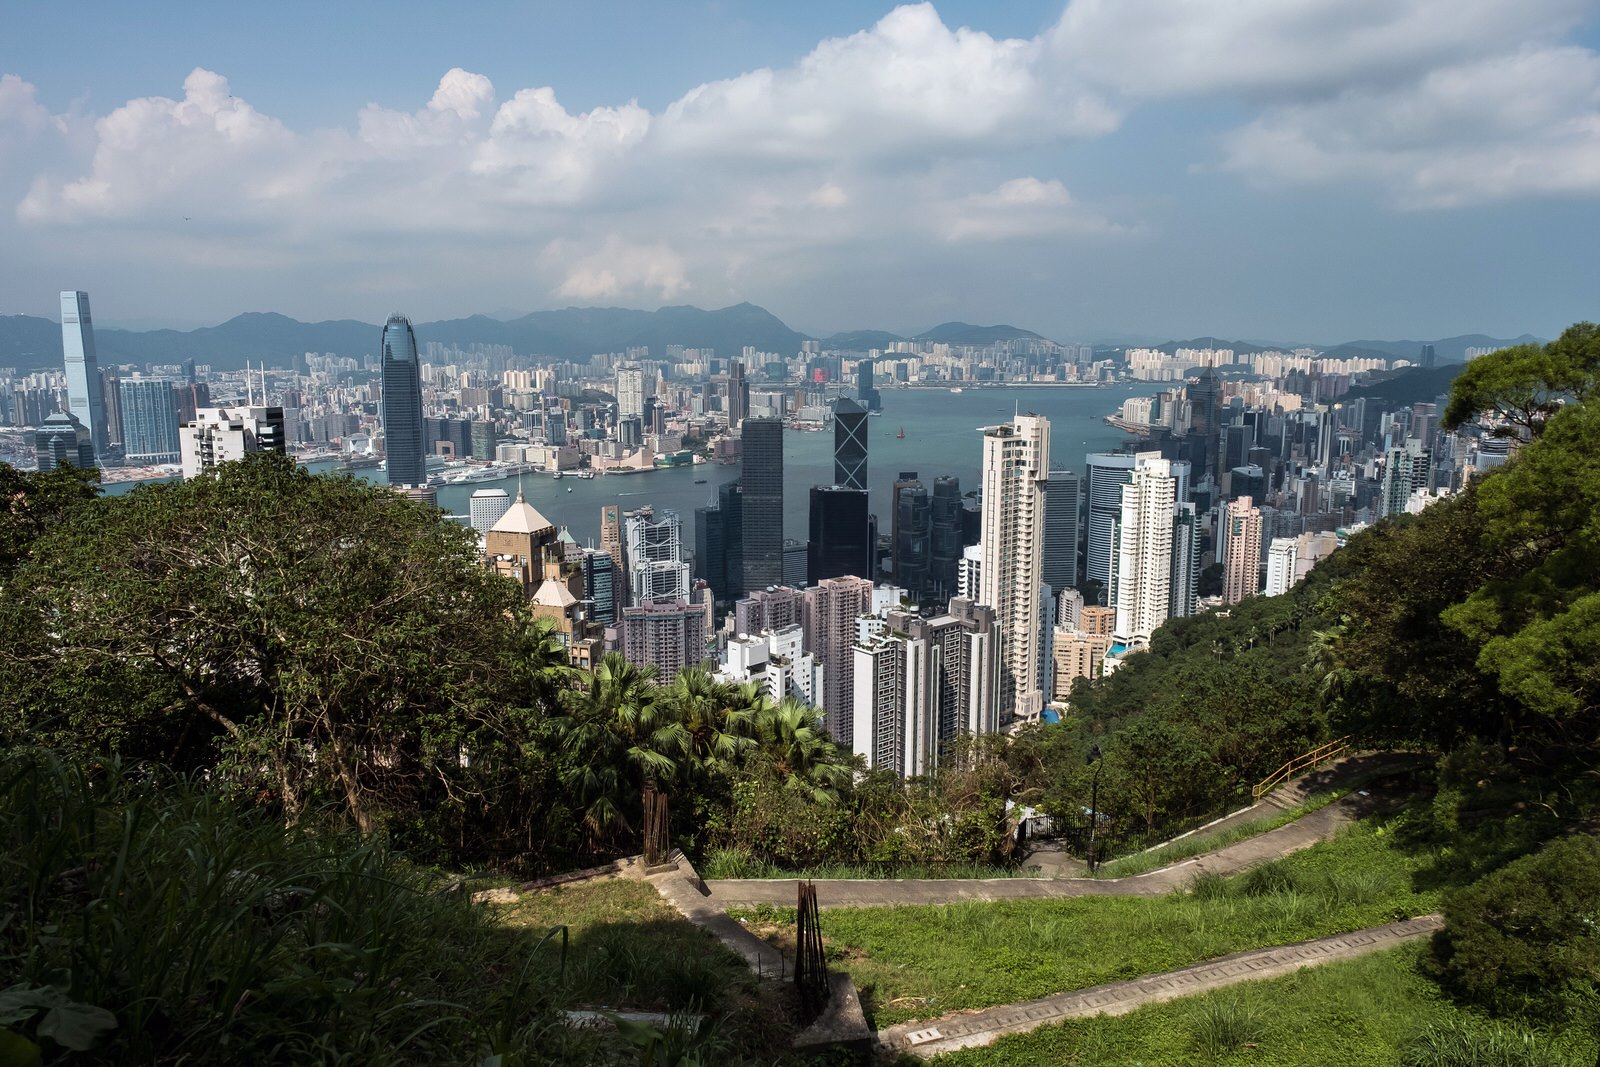 Grittier Hong Kong districts may prove alluring to wealthy investors